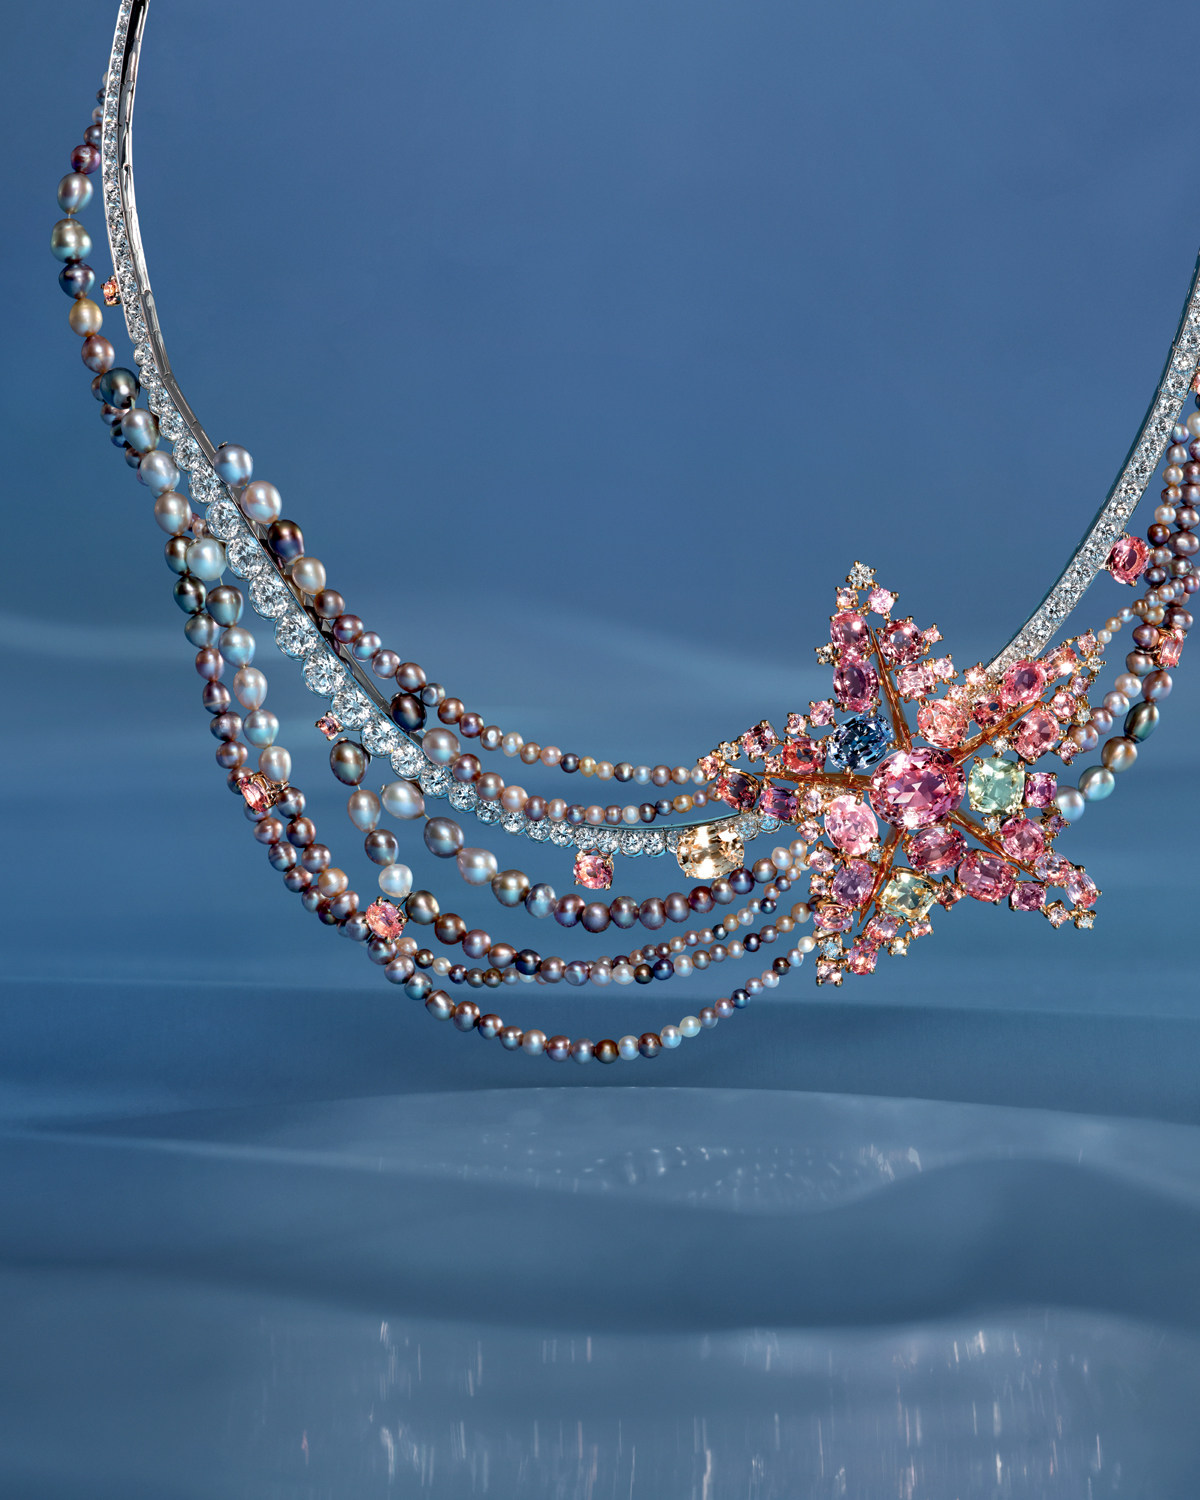 Chaumet Comètes des Mers pearl necklace, with a sea star fashioned from padparadscha sapphire. Photos: Handout